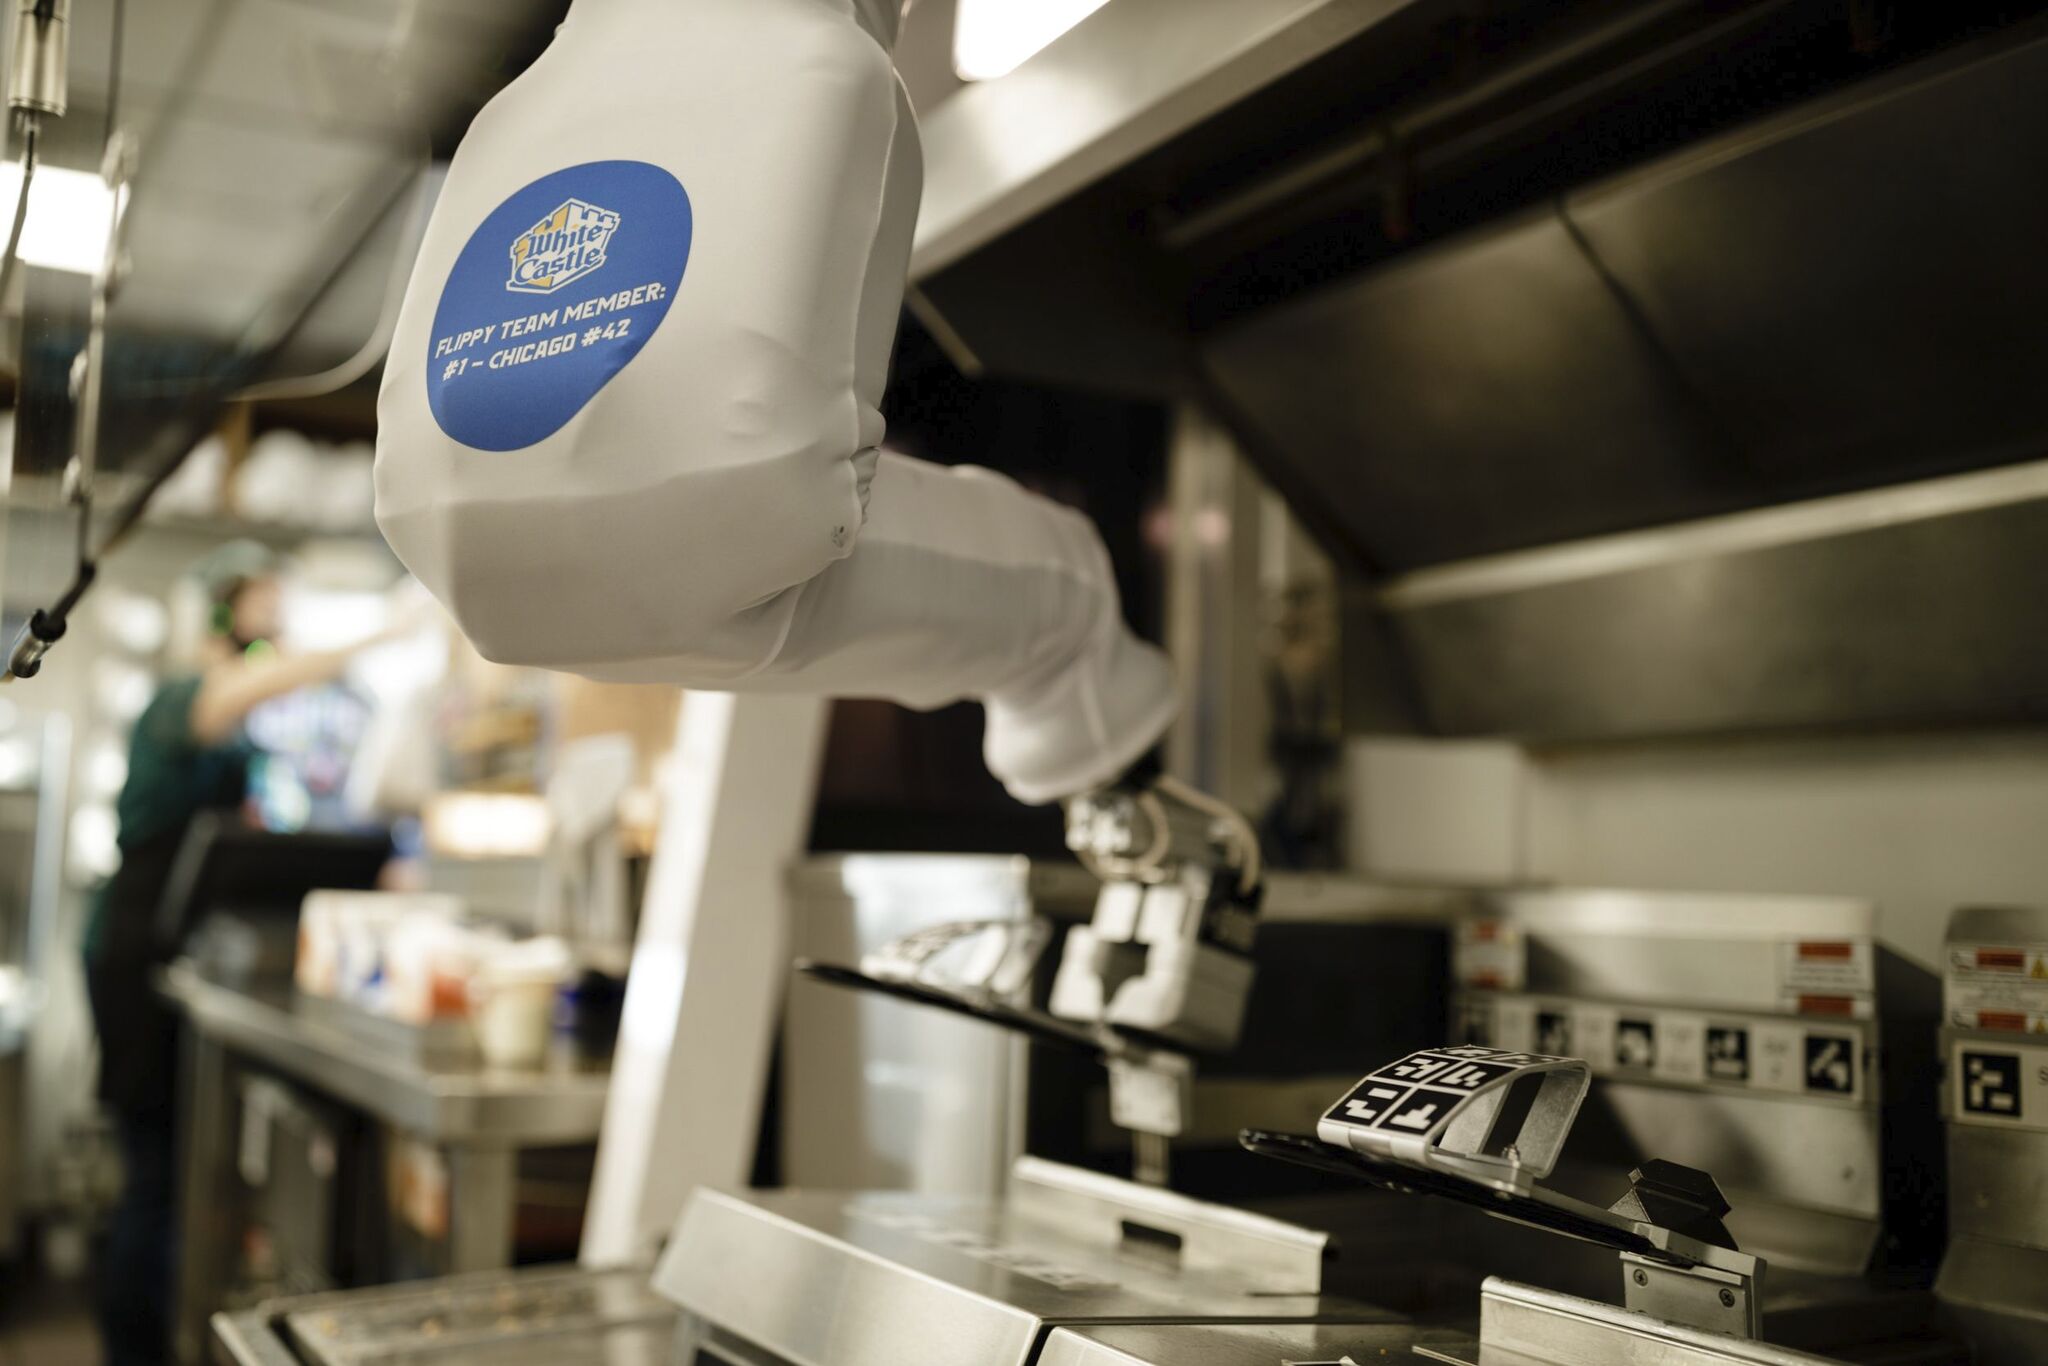 lippy the burger-flipping robot working at a White Castle location in Chicago.